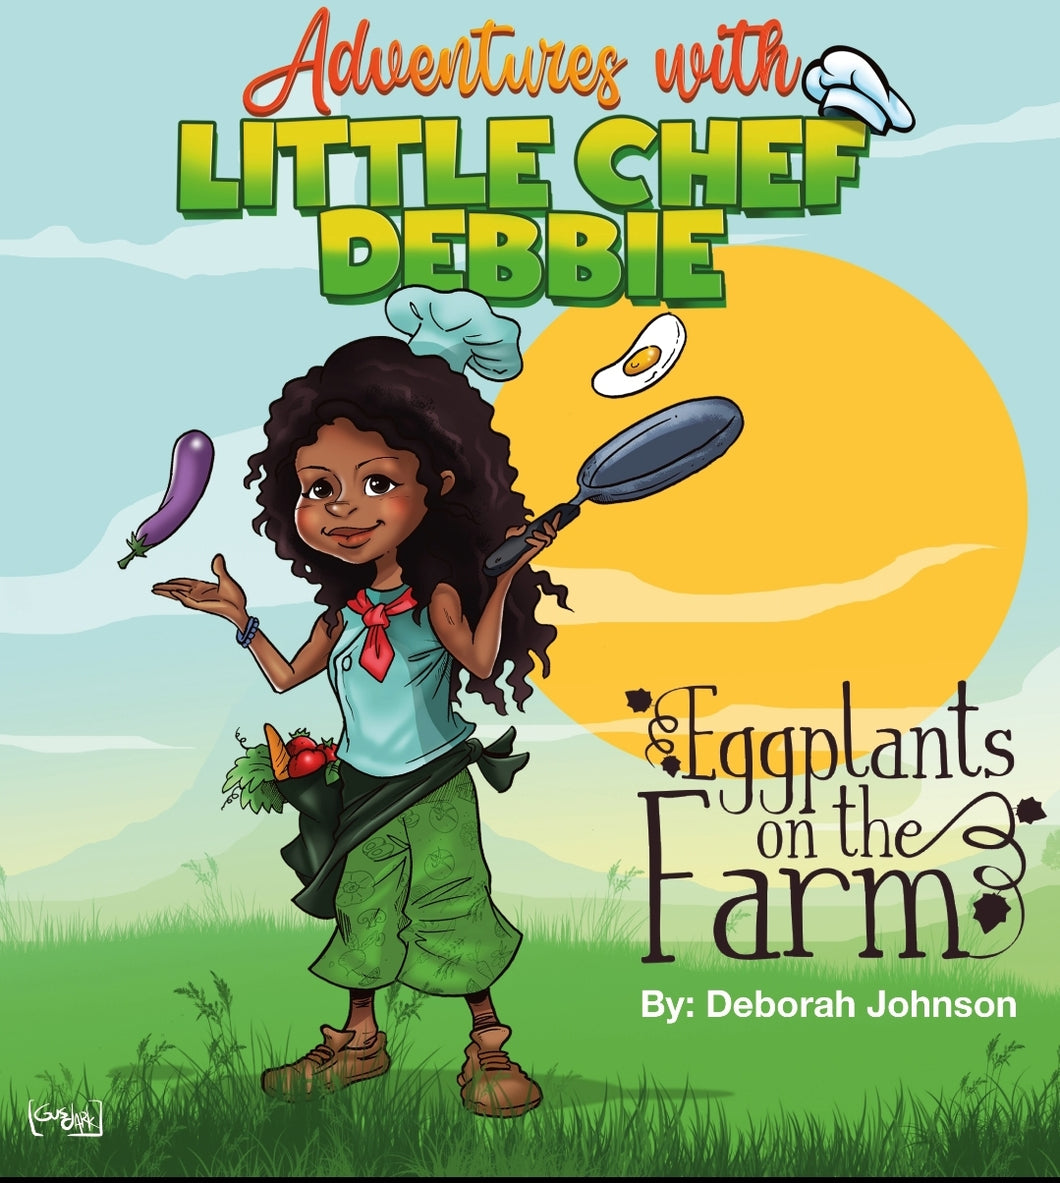 Eggplants on The Farm - Adventures with Little Chef Debbie